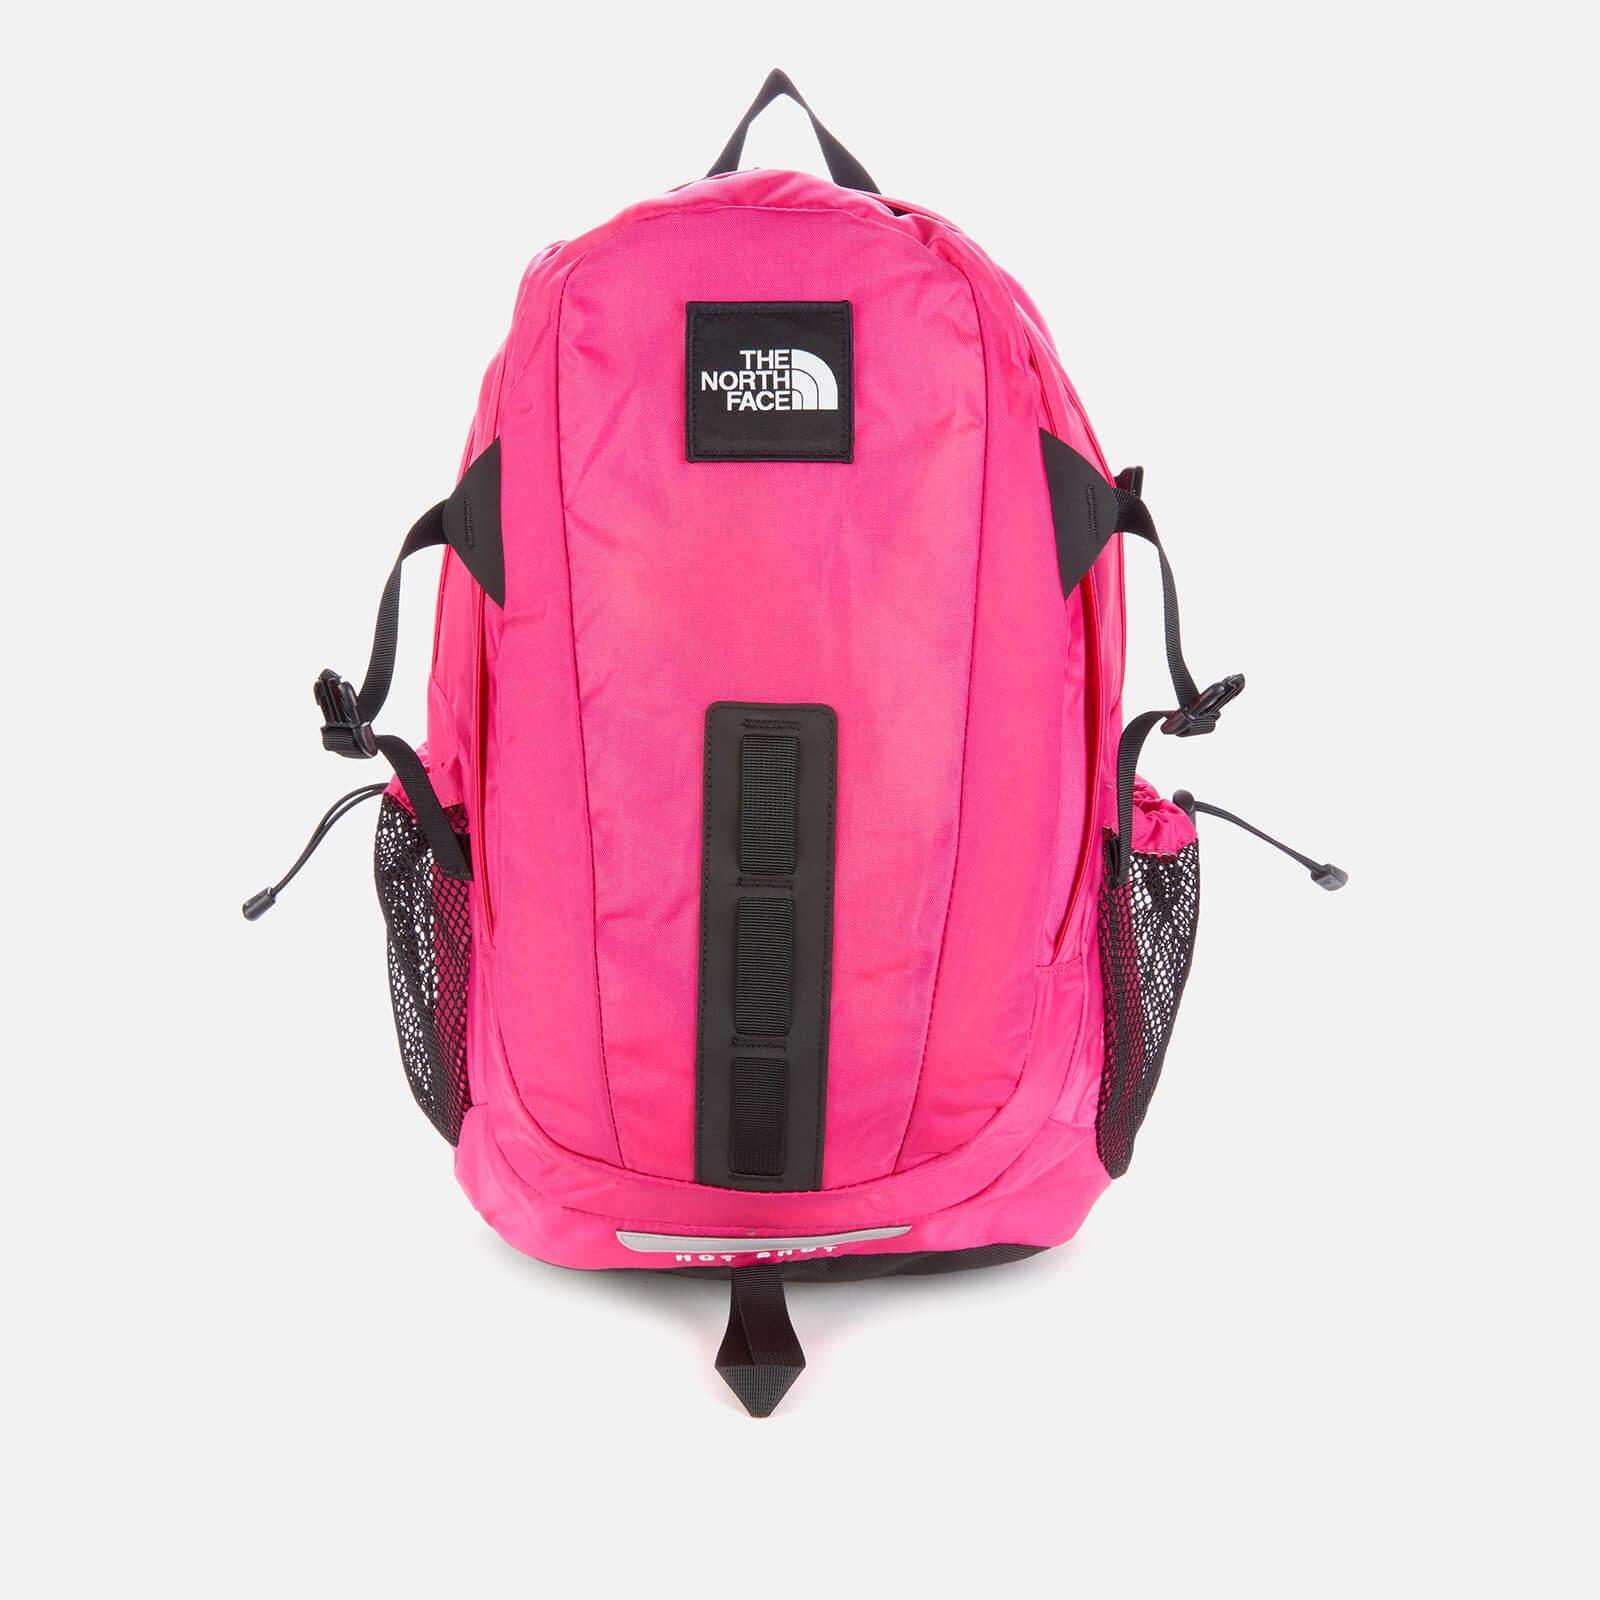 The North Face Fleece Hot Shot Se Backpack in Pink - Lyst